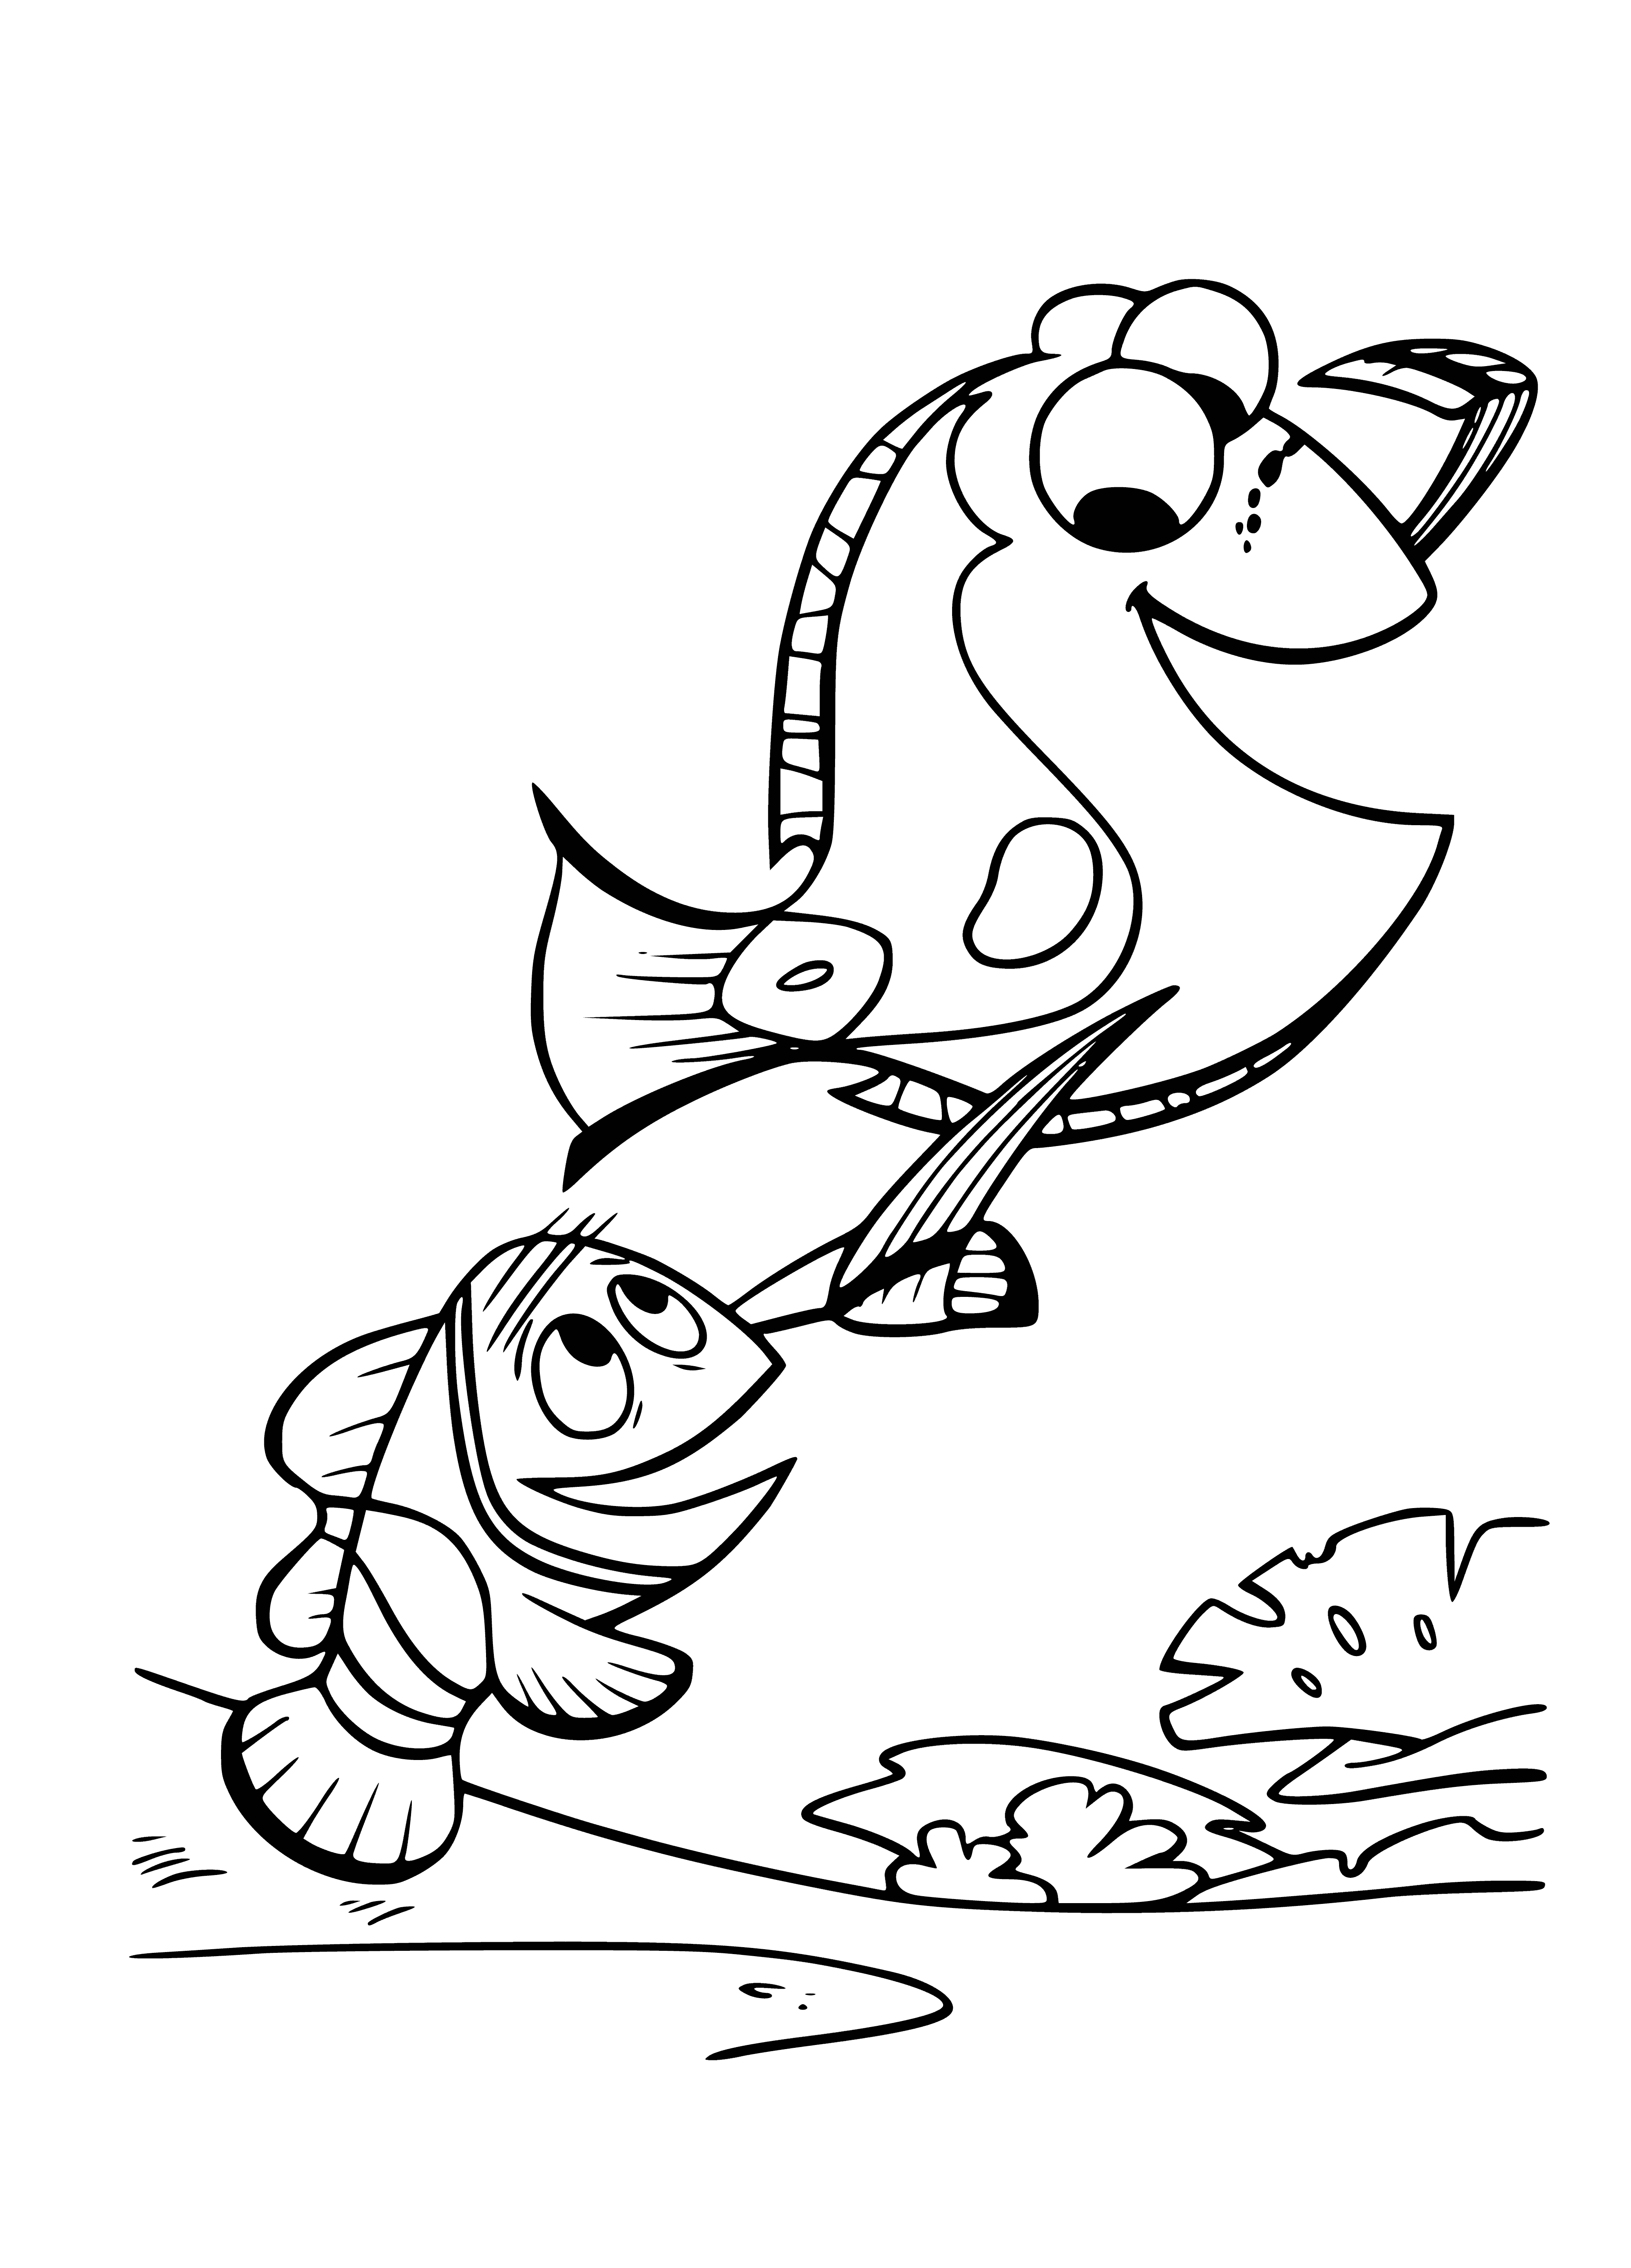 I saw the boat! coloring page